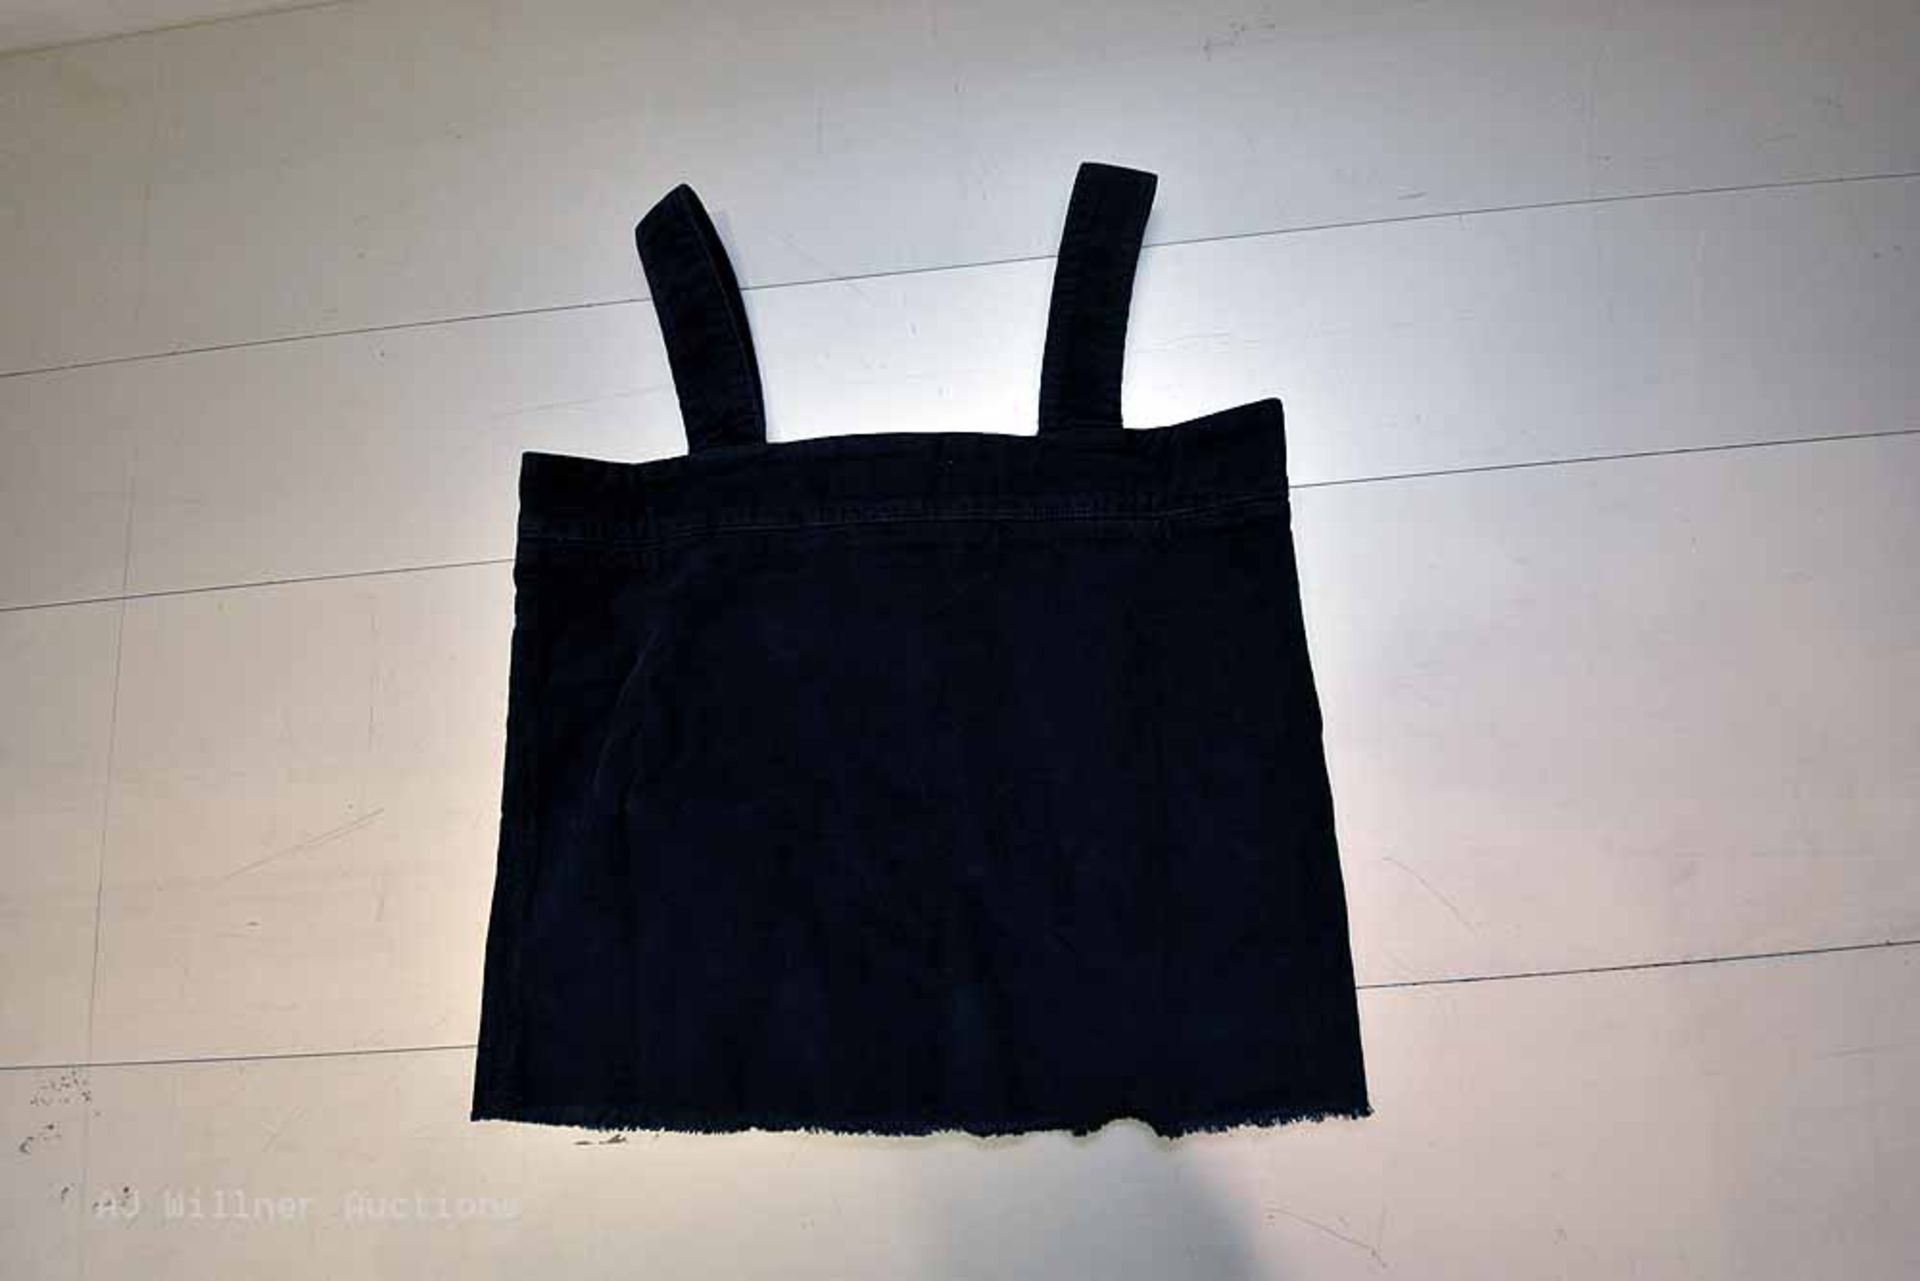 The Cords & Co. "Ellie" Style, Women's Skirt Washed Black,Denim Blue - Image 6 of 7